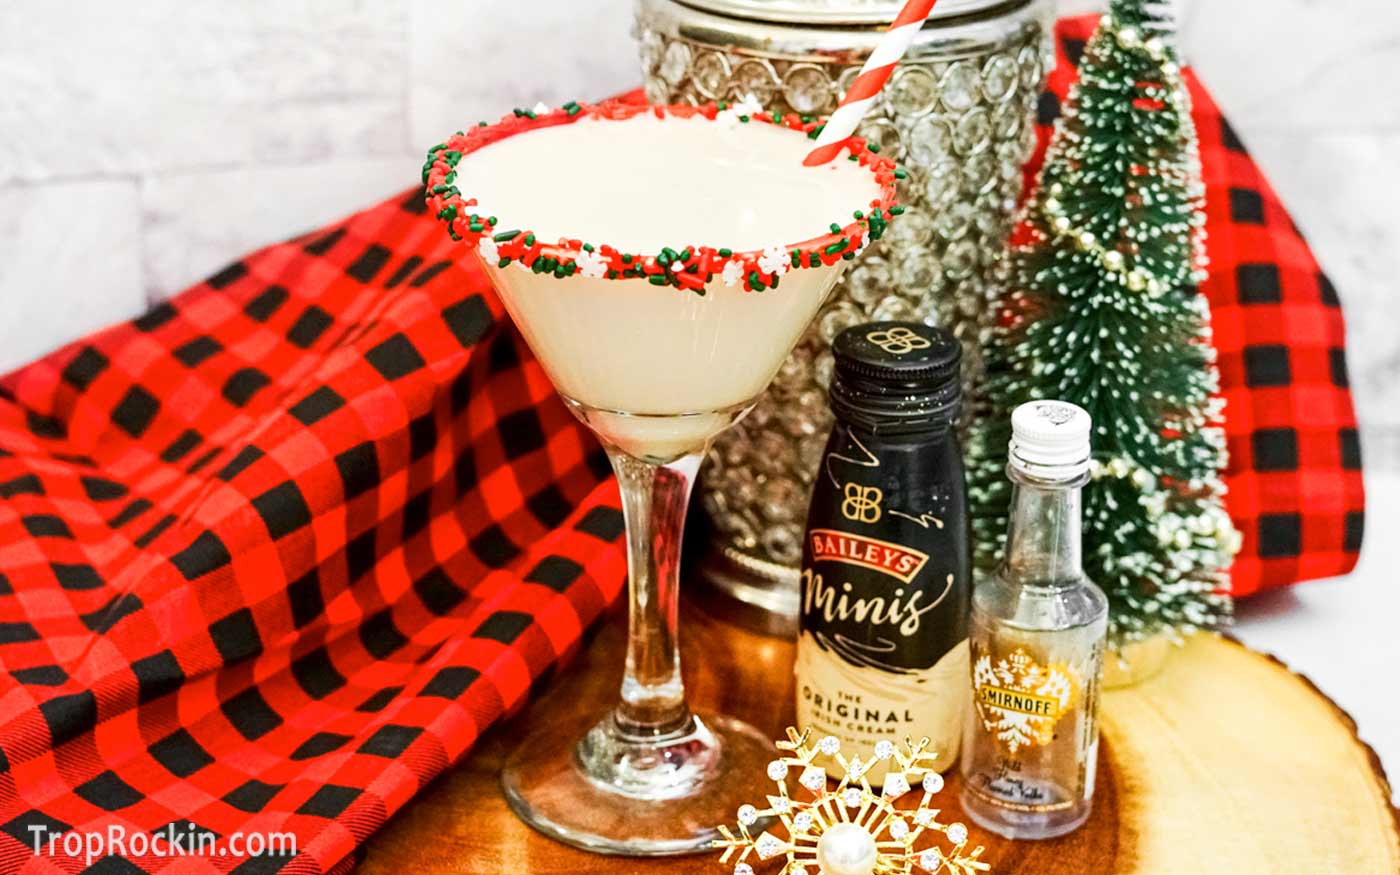 Sugar cookie martini with red and green sprinkles on rim of a martini glass. 